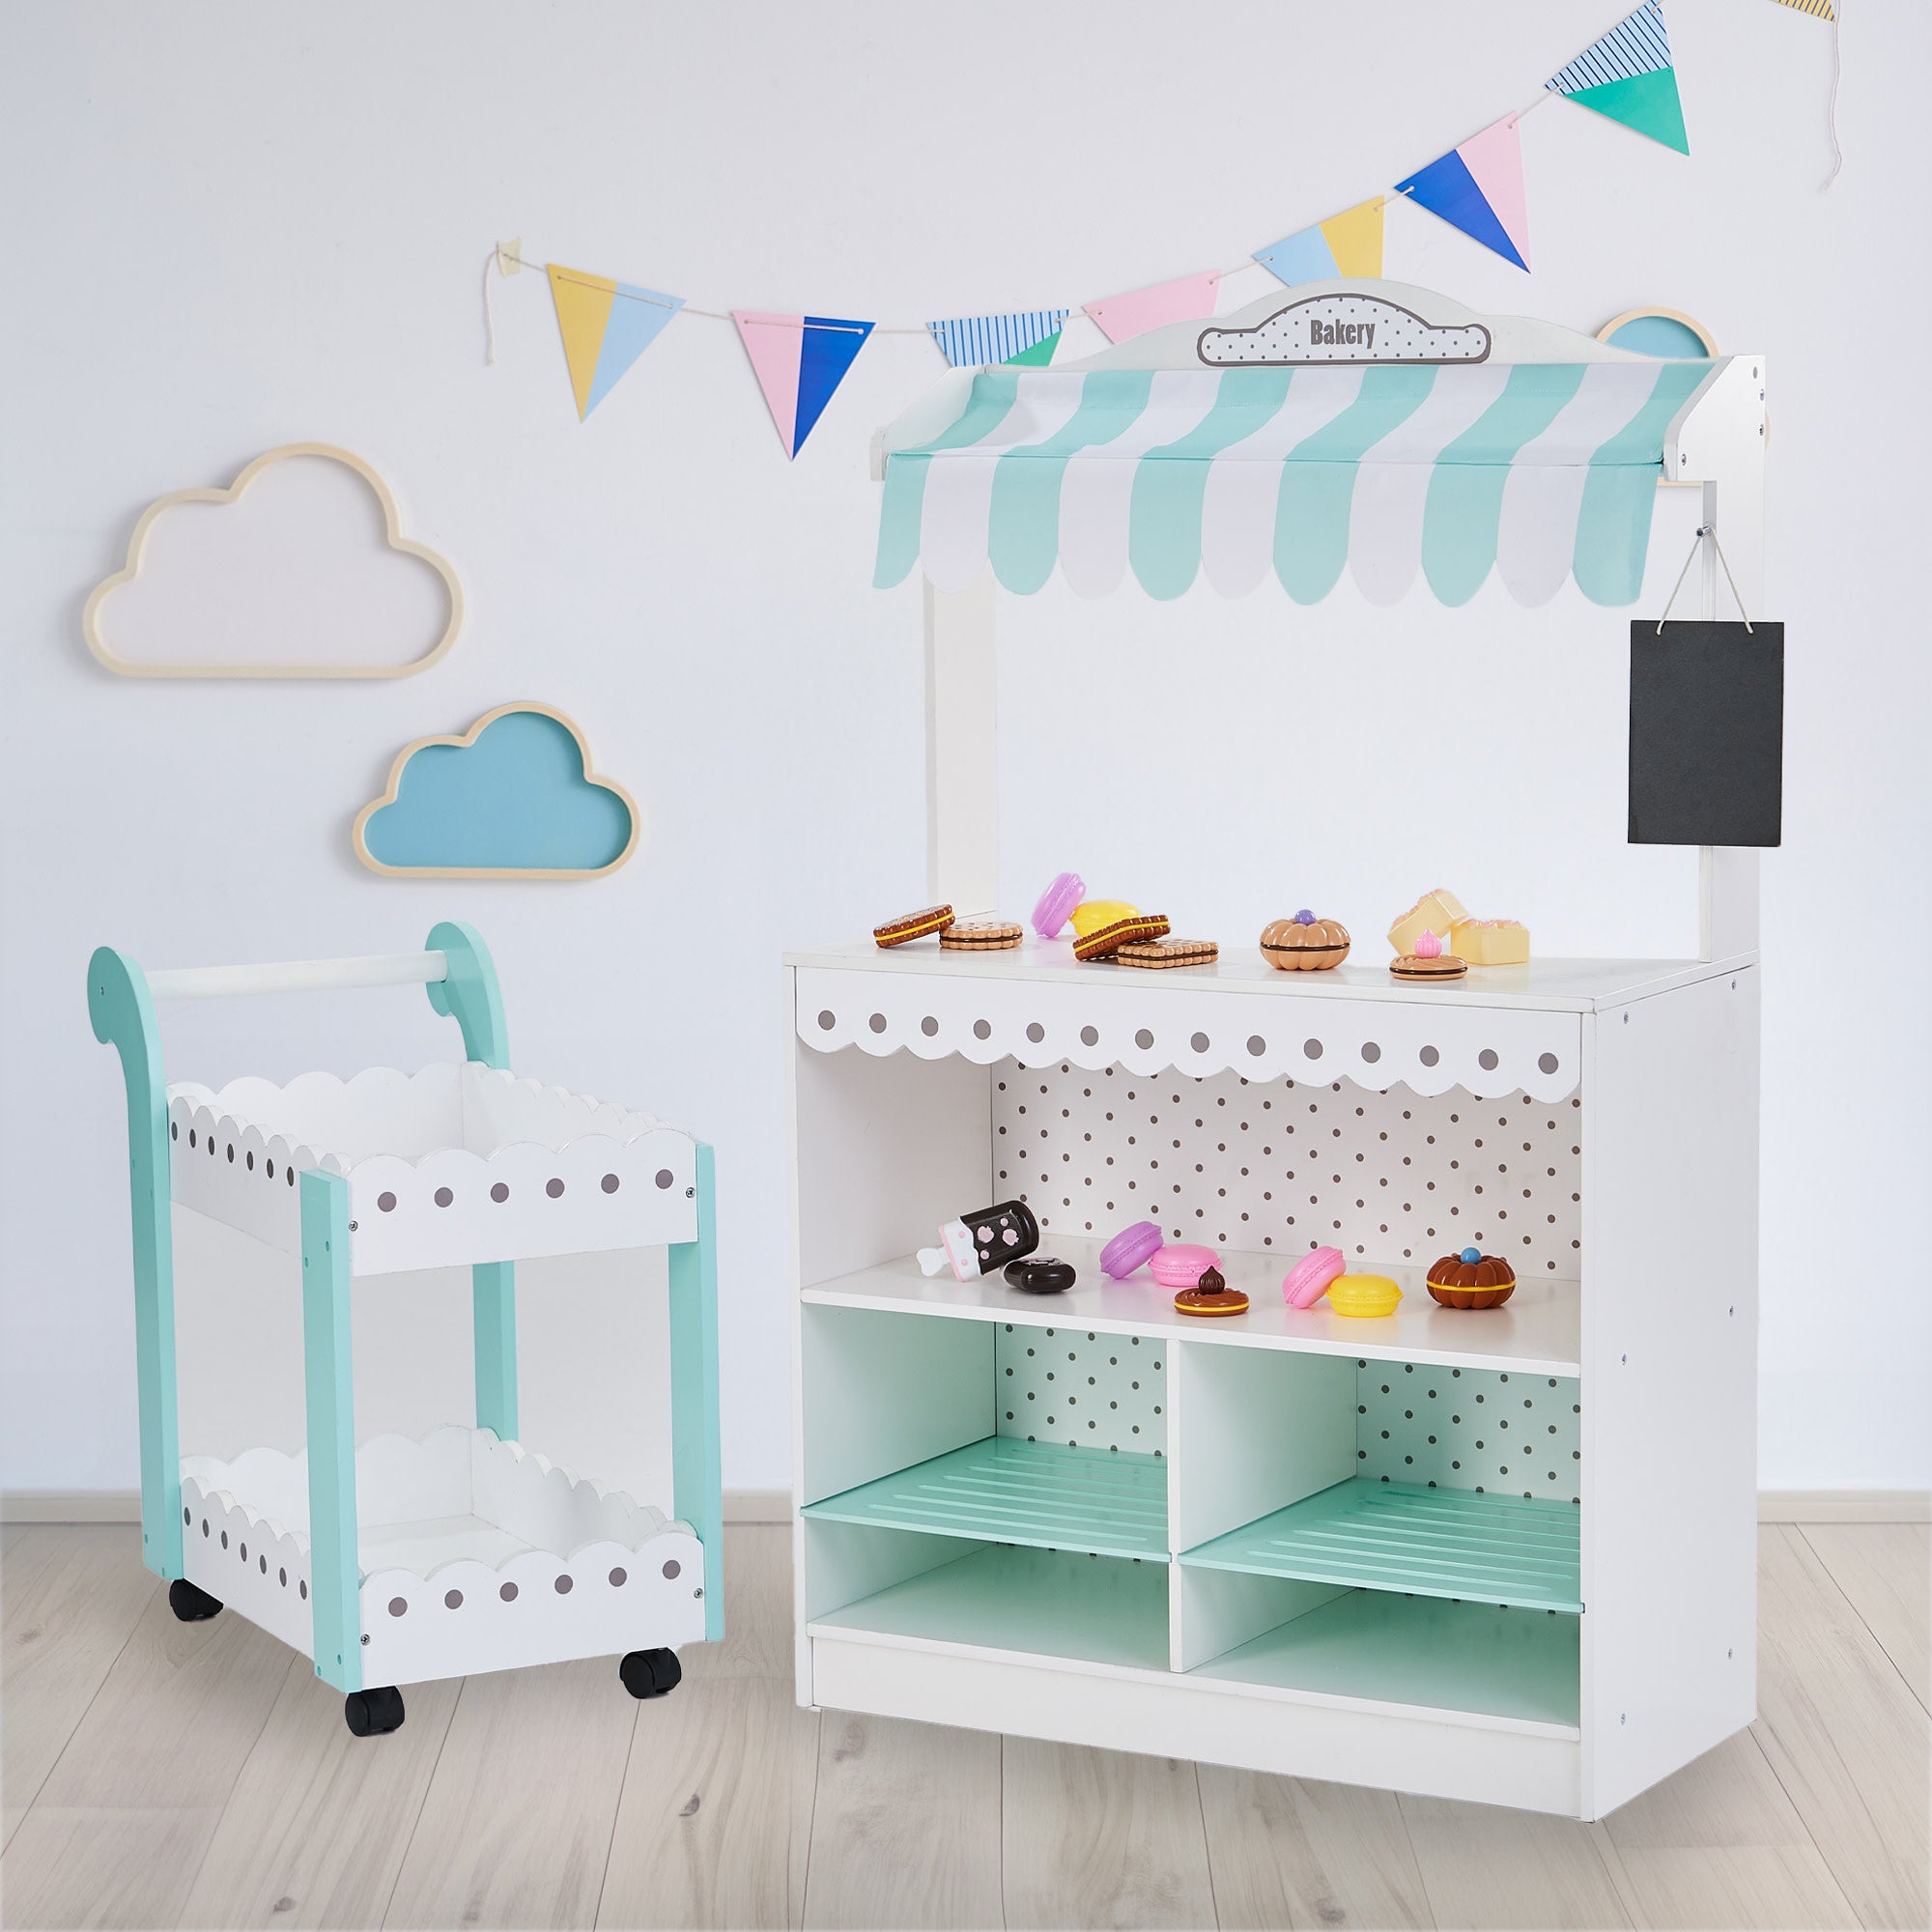 Teamson Kids My Dream Bakery Shop, Treat Stand and Dessert Cart, White/Blue